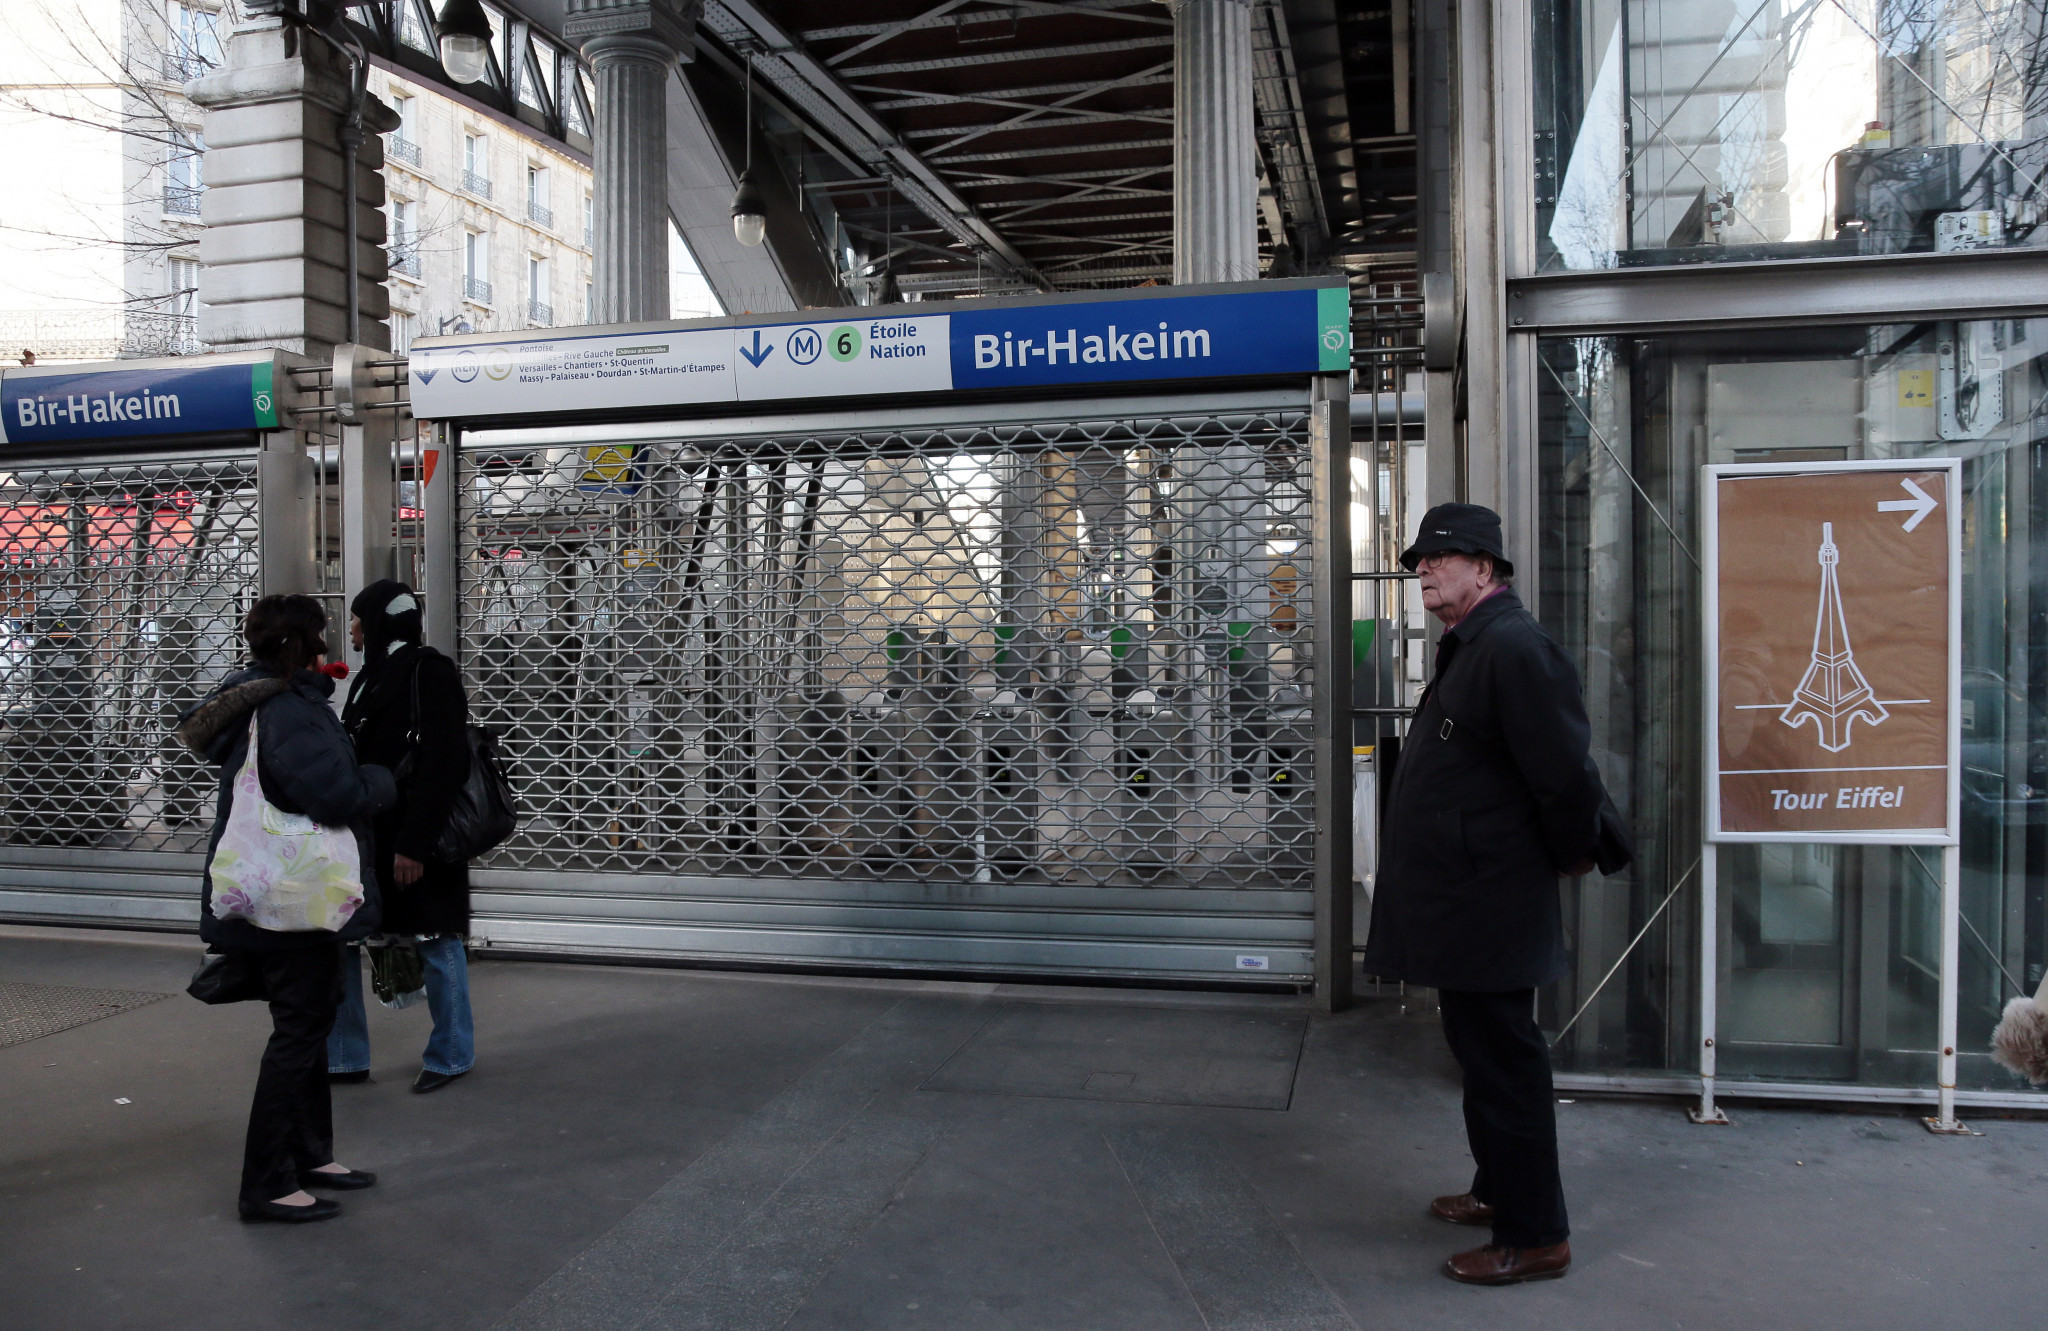 Construction work causing months of Parisian metro disruption before 2024 Olympics